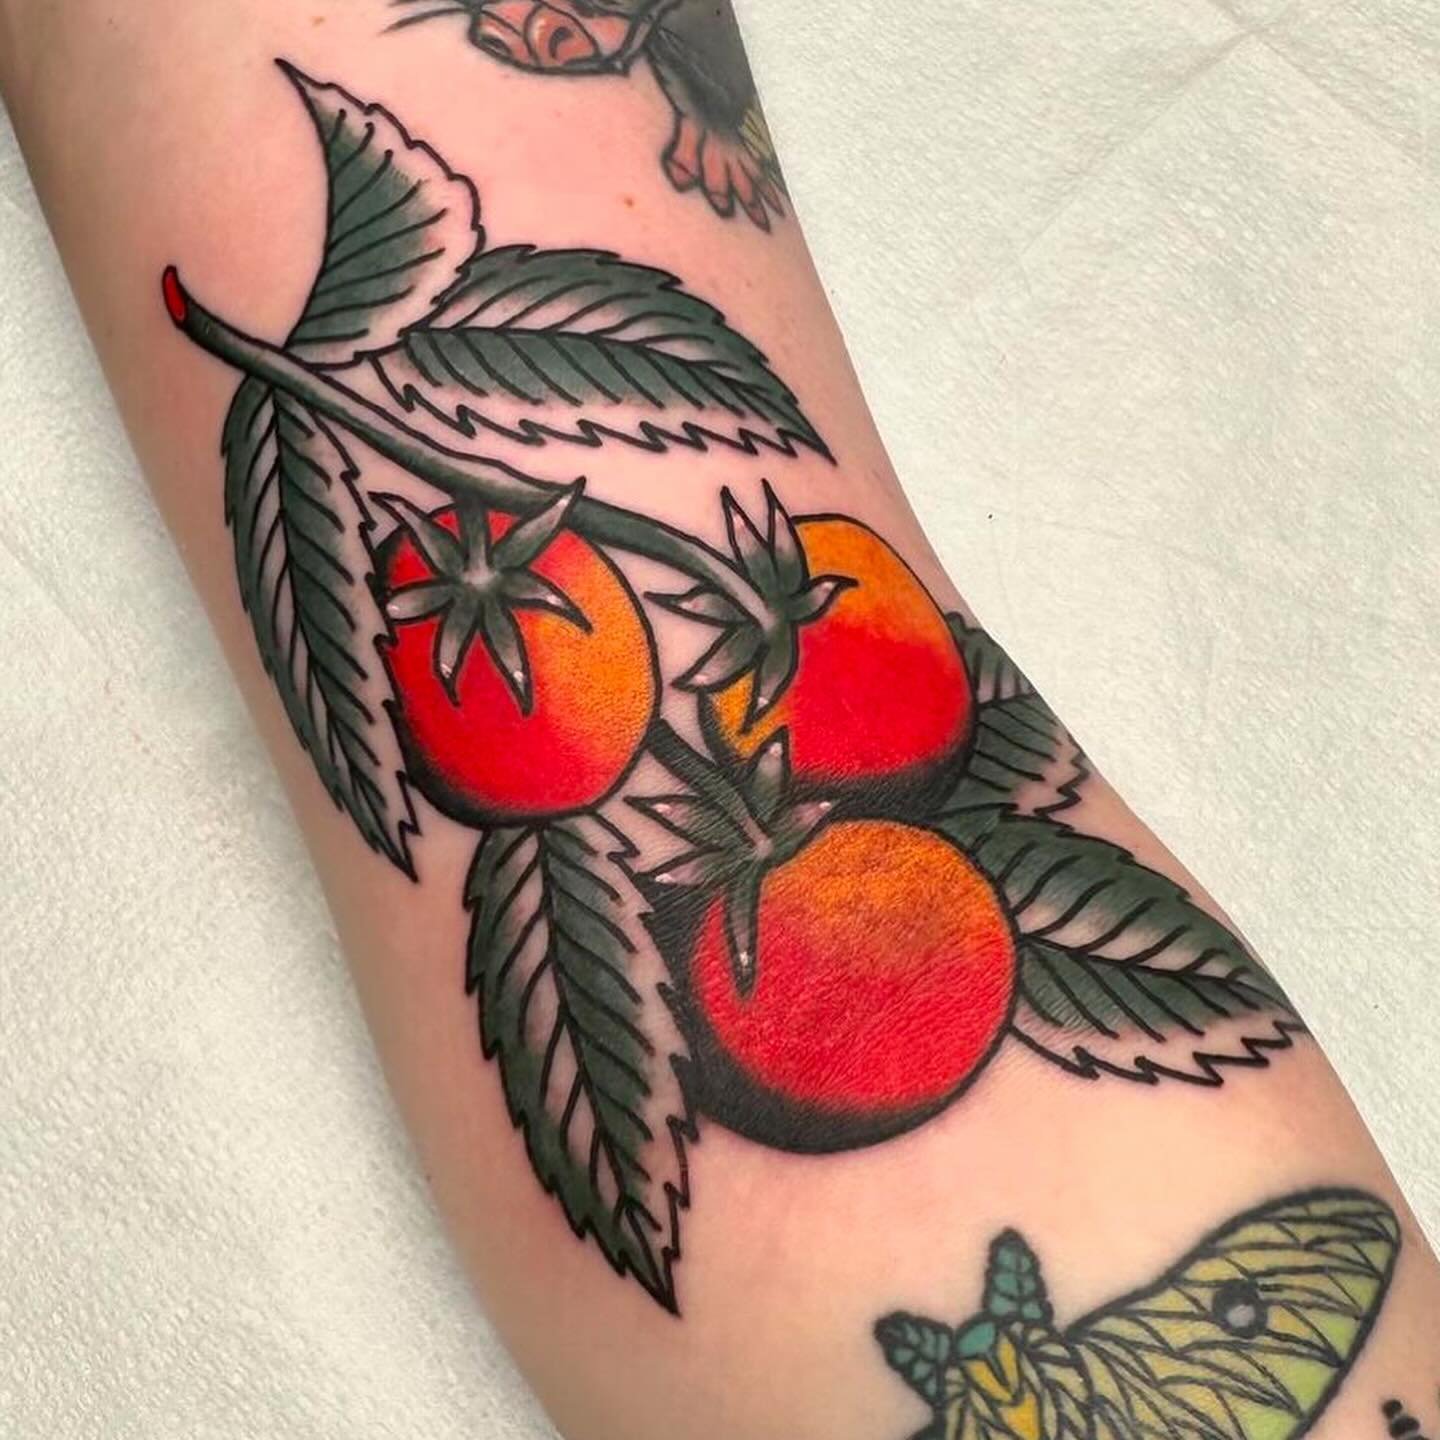 fresh on the vine!! cute tomatos by @carbellatattoo 

to book with carissa, fill out the form linked in her bio! @carbellatattoo 

#gardenfresh #tomatoes #tomatotoes